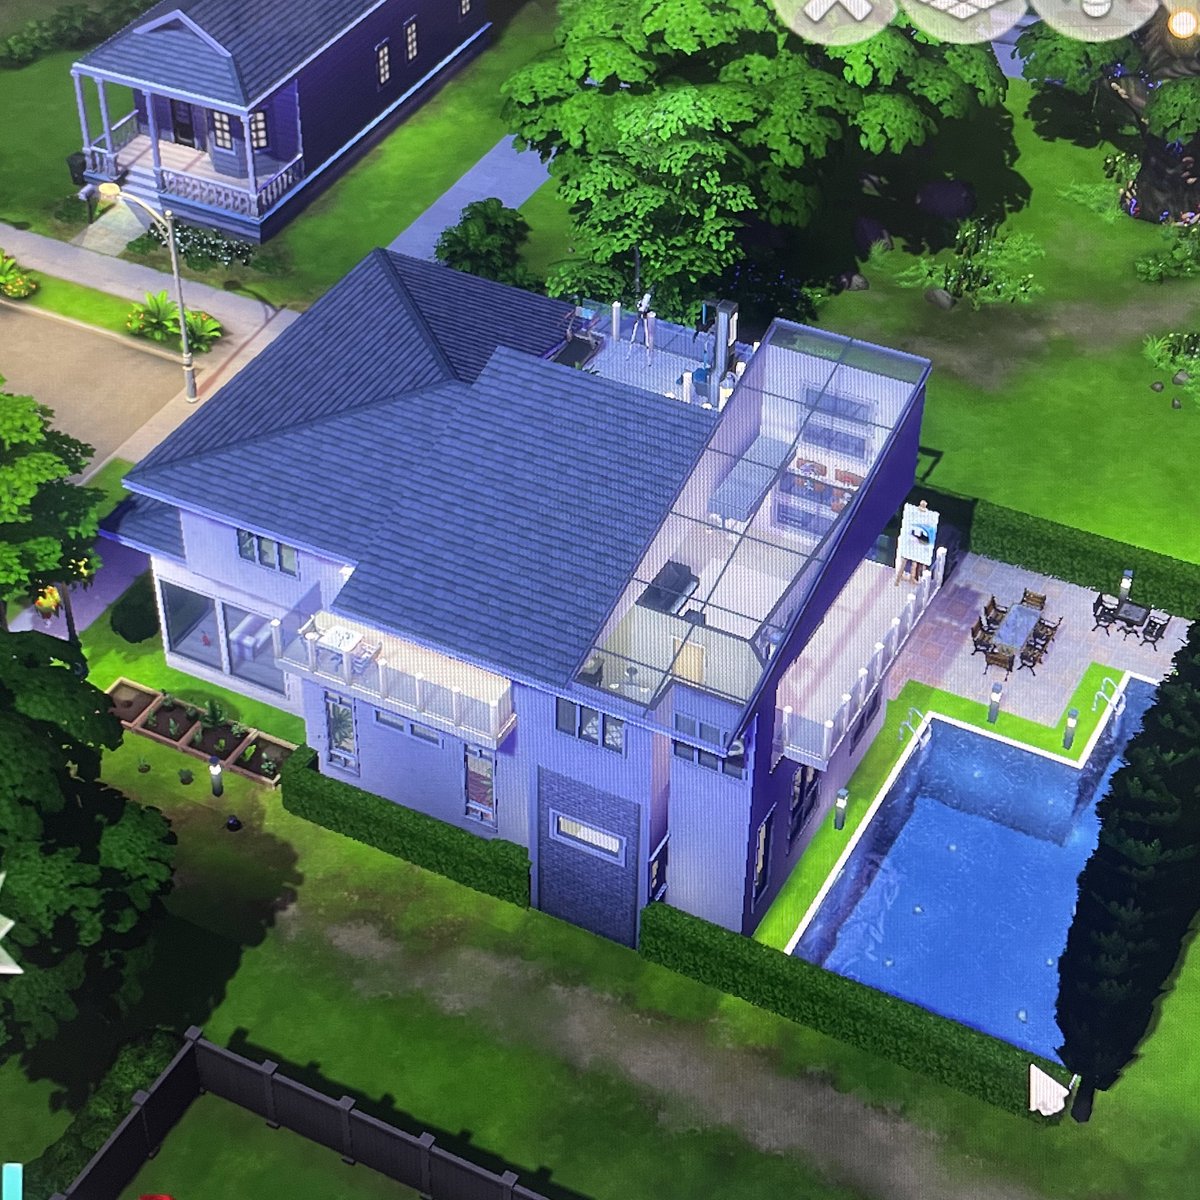 Please look at my house in the Sims. I’m very proud of it.